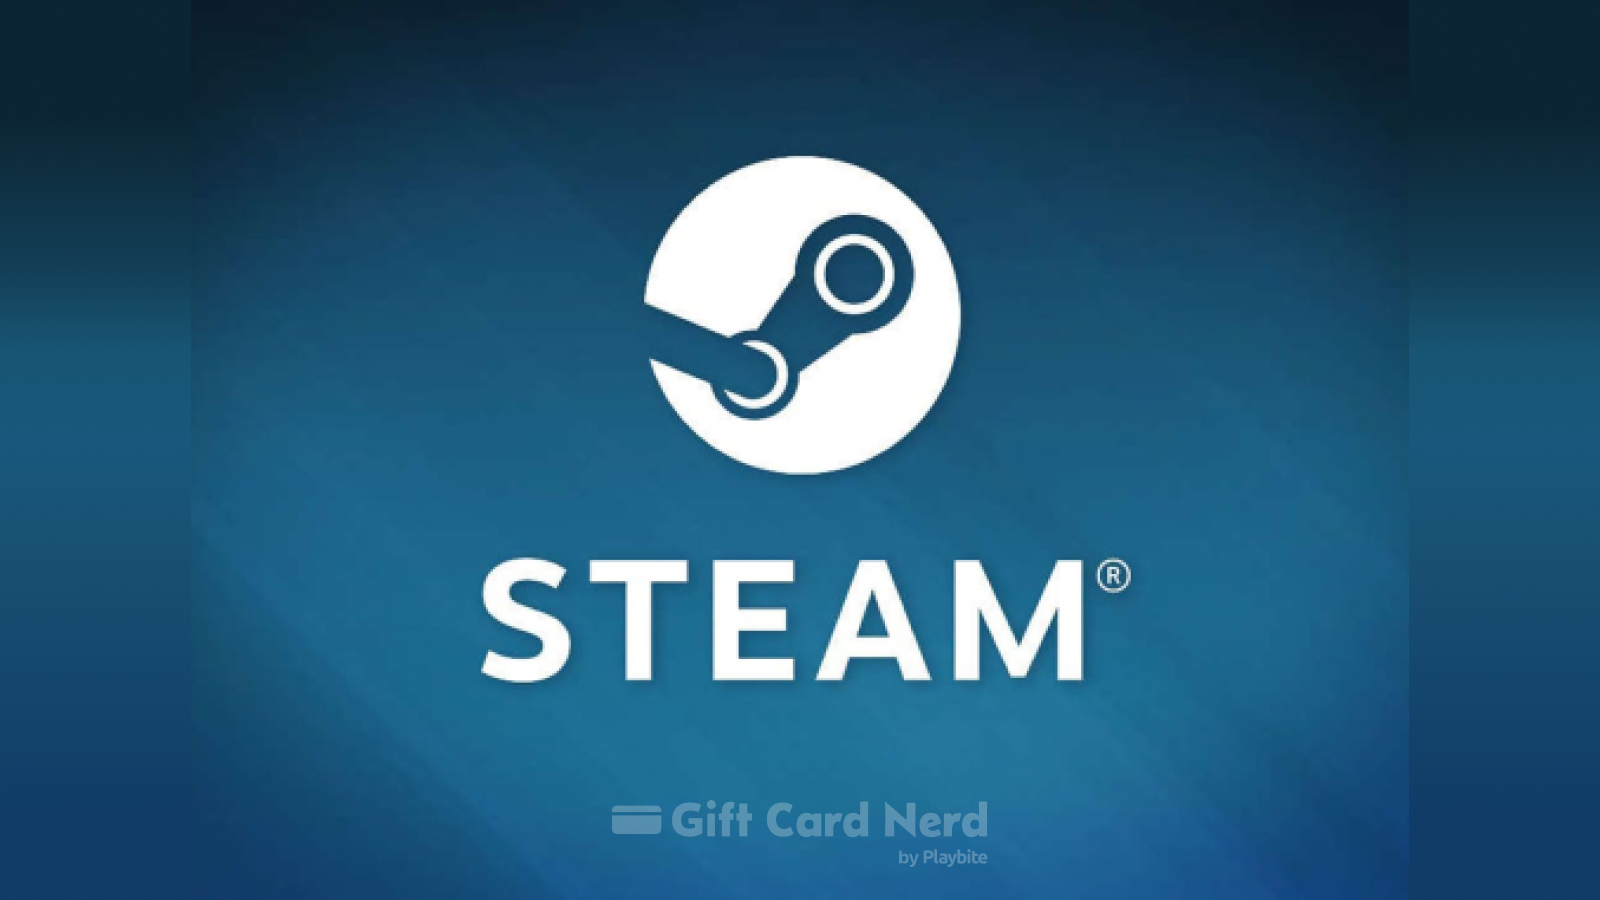 Can You Use a Steam Gift Card on Grubhub?